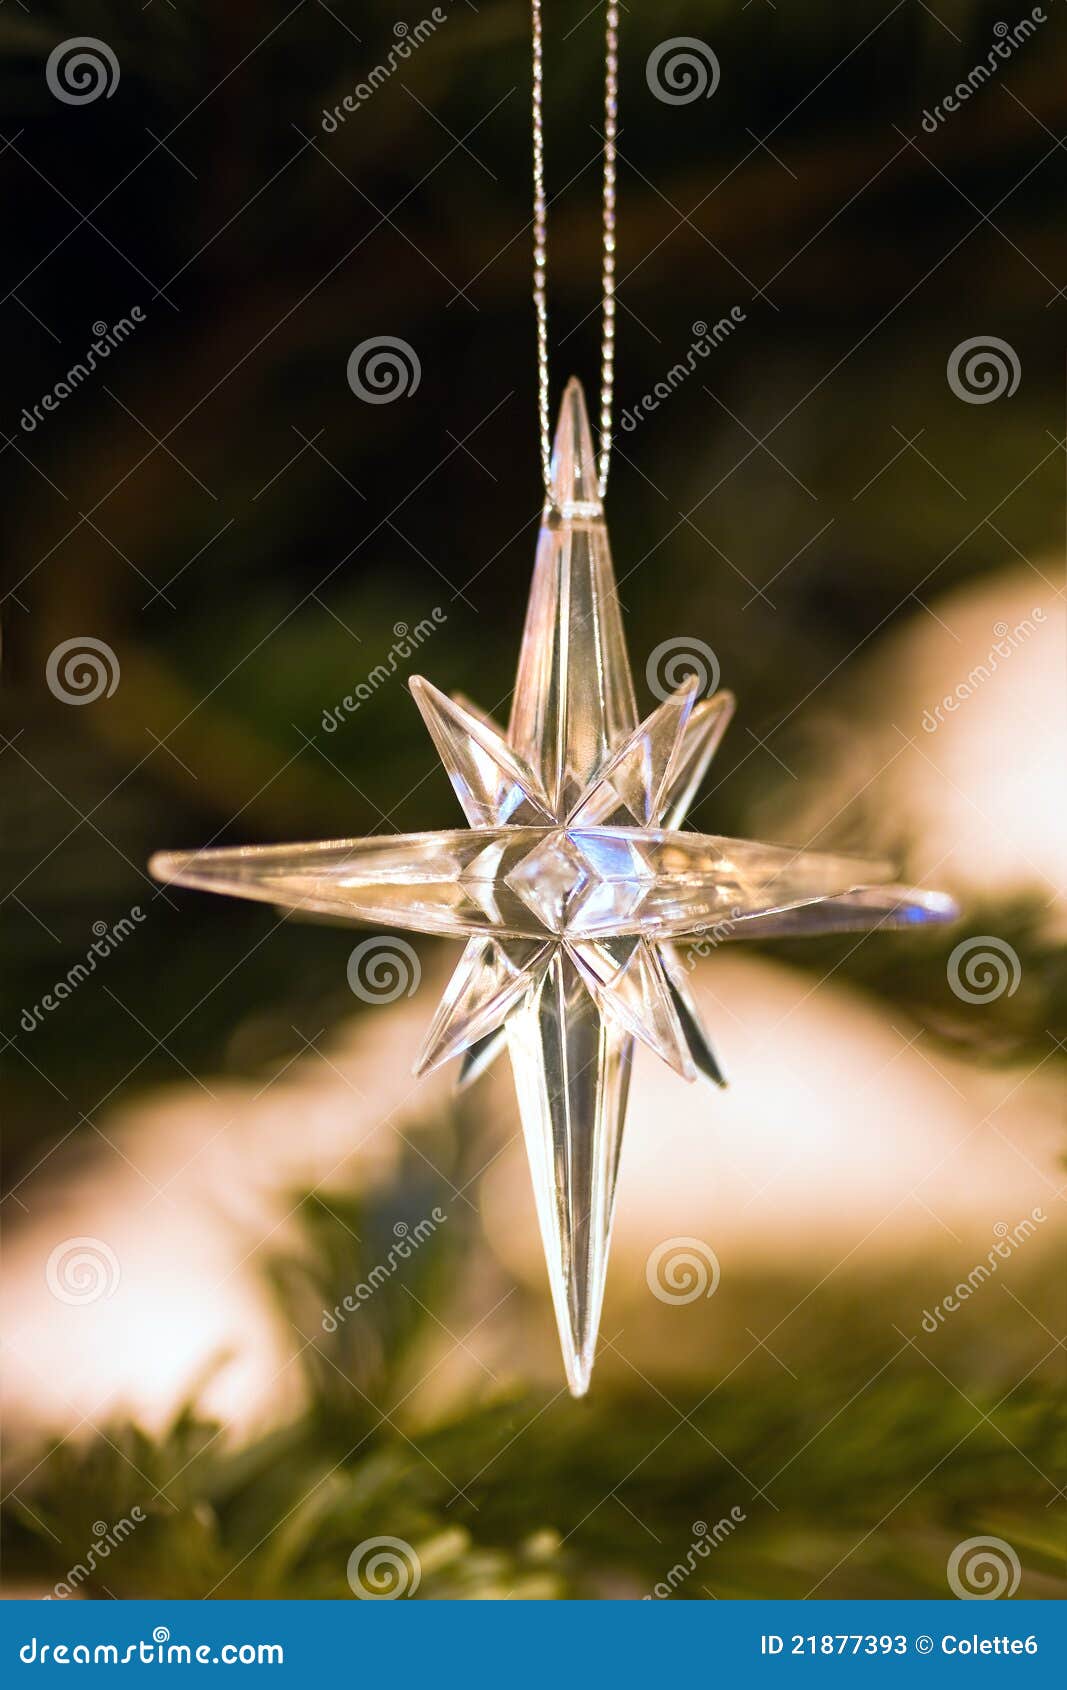 star as decoration in christmastree